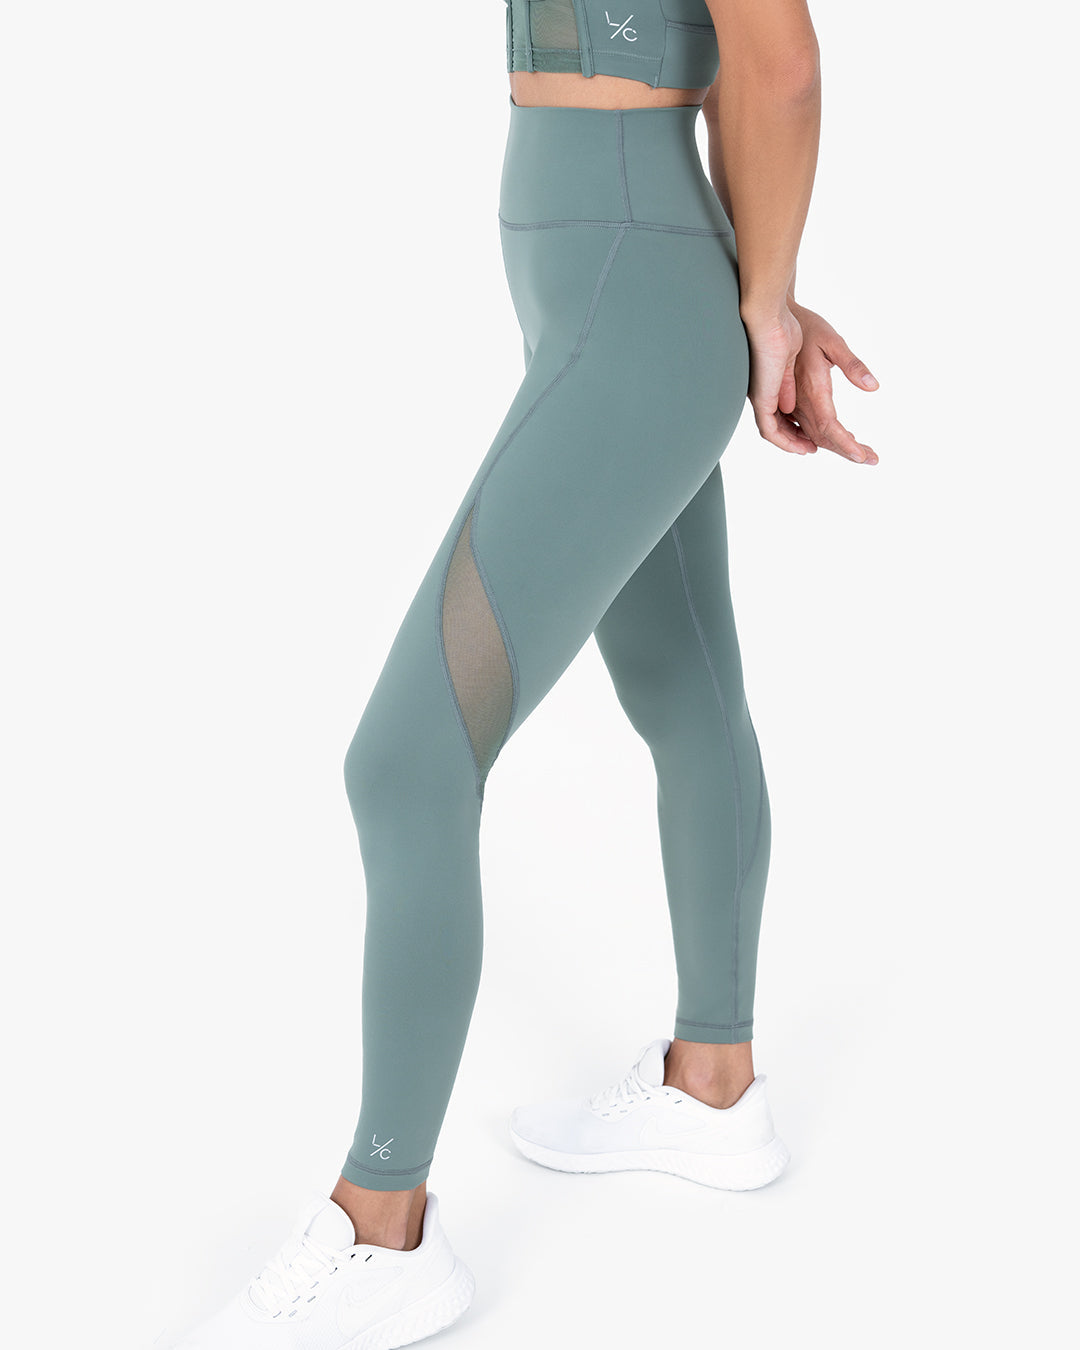 DOYOUEVEN Impact Seamless Leggings FOREST GREEN SIZE L - LEGGINGS ONLY |  eBay